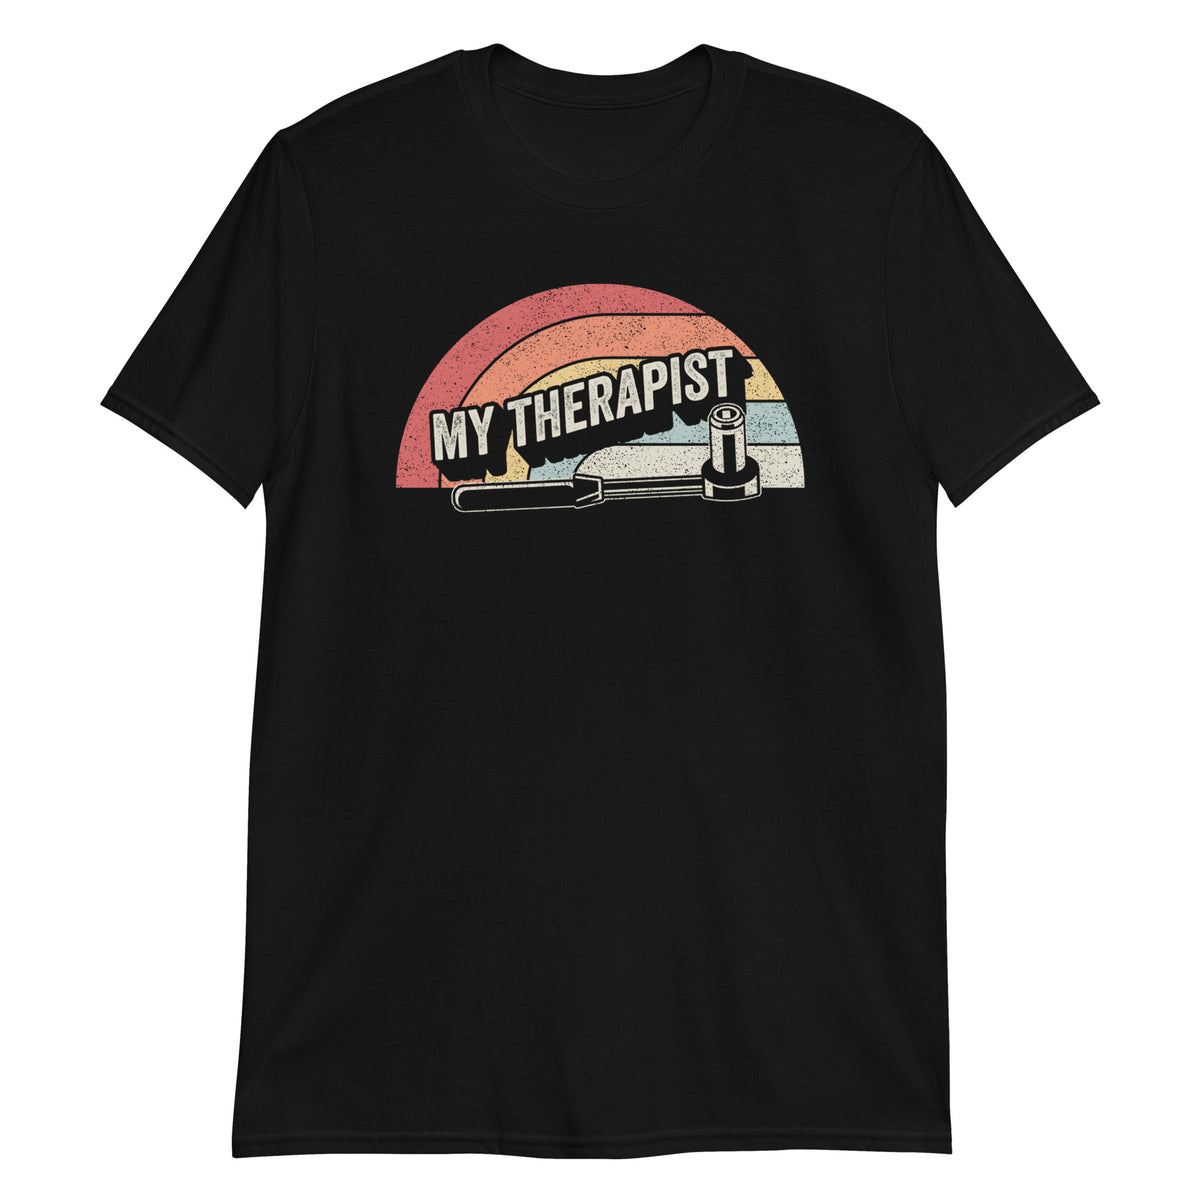 My Thereapist T-Shirt